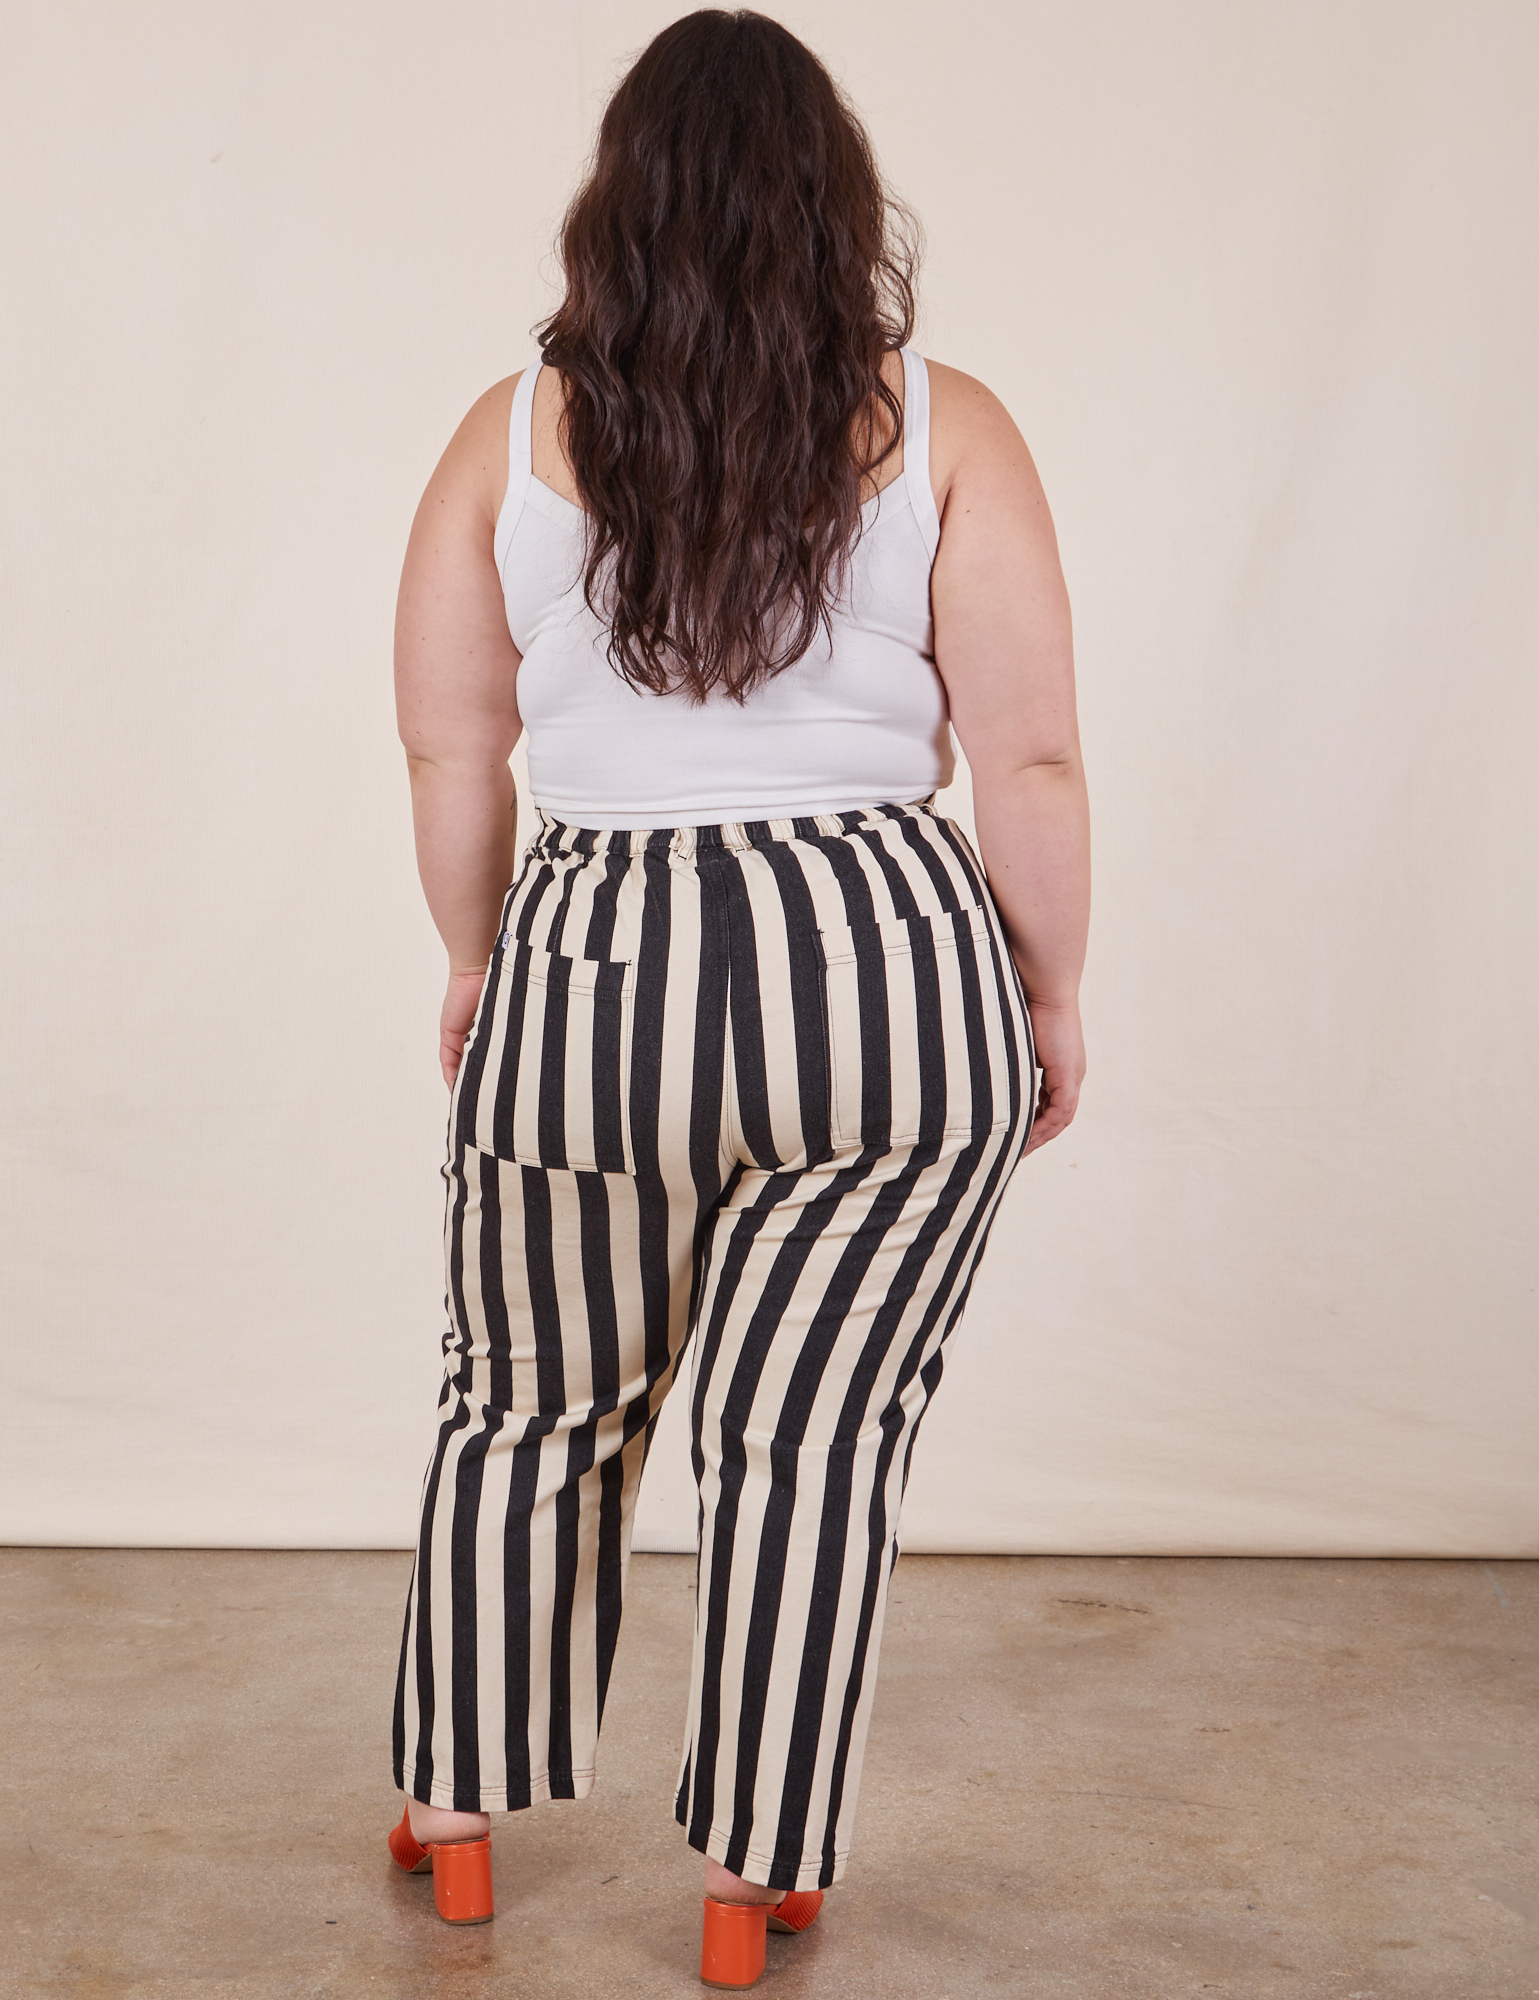 Back view of Petite Black Striped Work Pants in White on Ashley